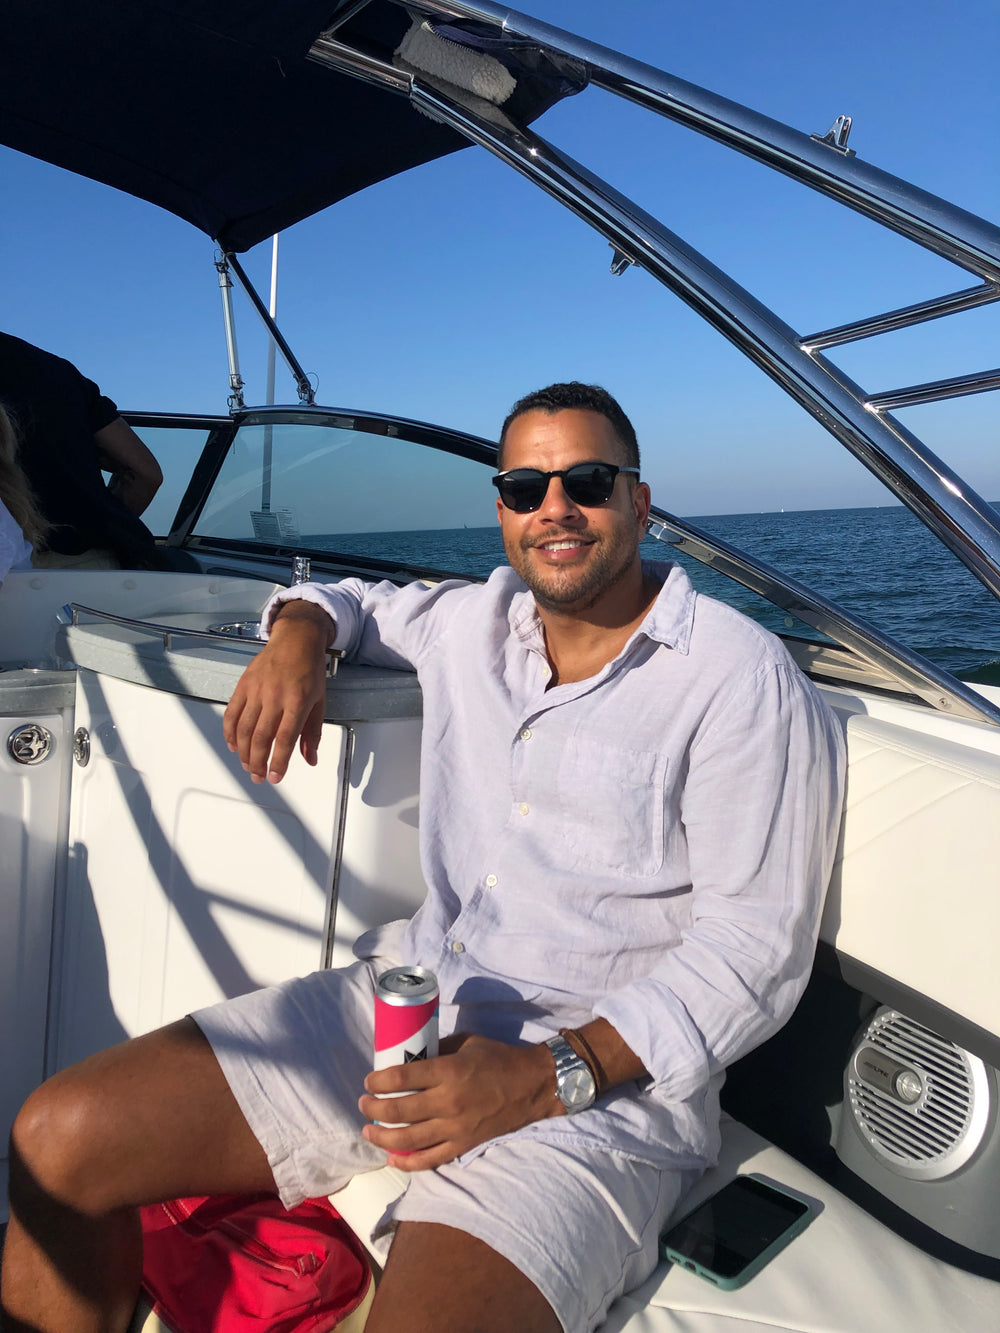 Cool Cat’s Co-Founder Rocco Venneri drinking a canned spritzer on a boat.